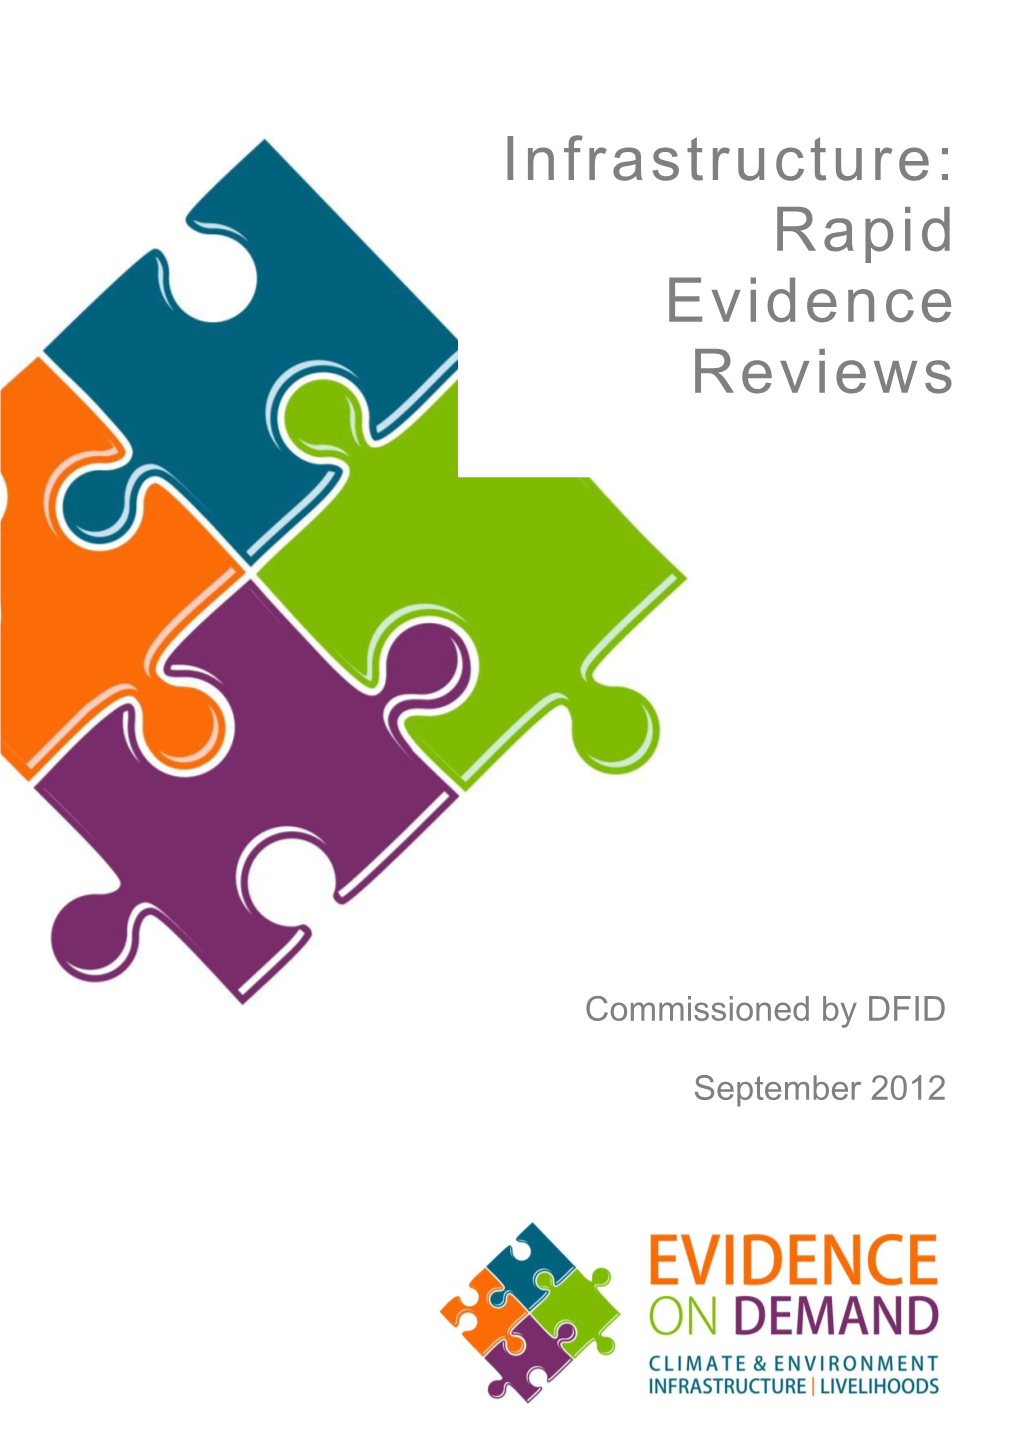 Infrastructure: Rapid Evidence Reviews